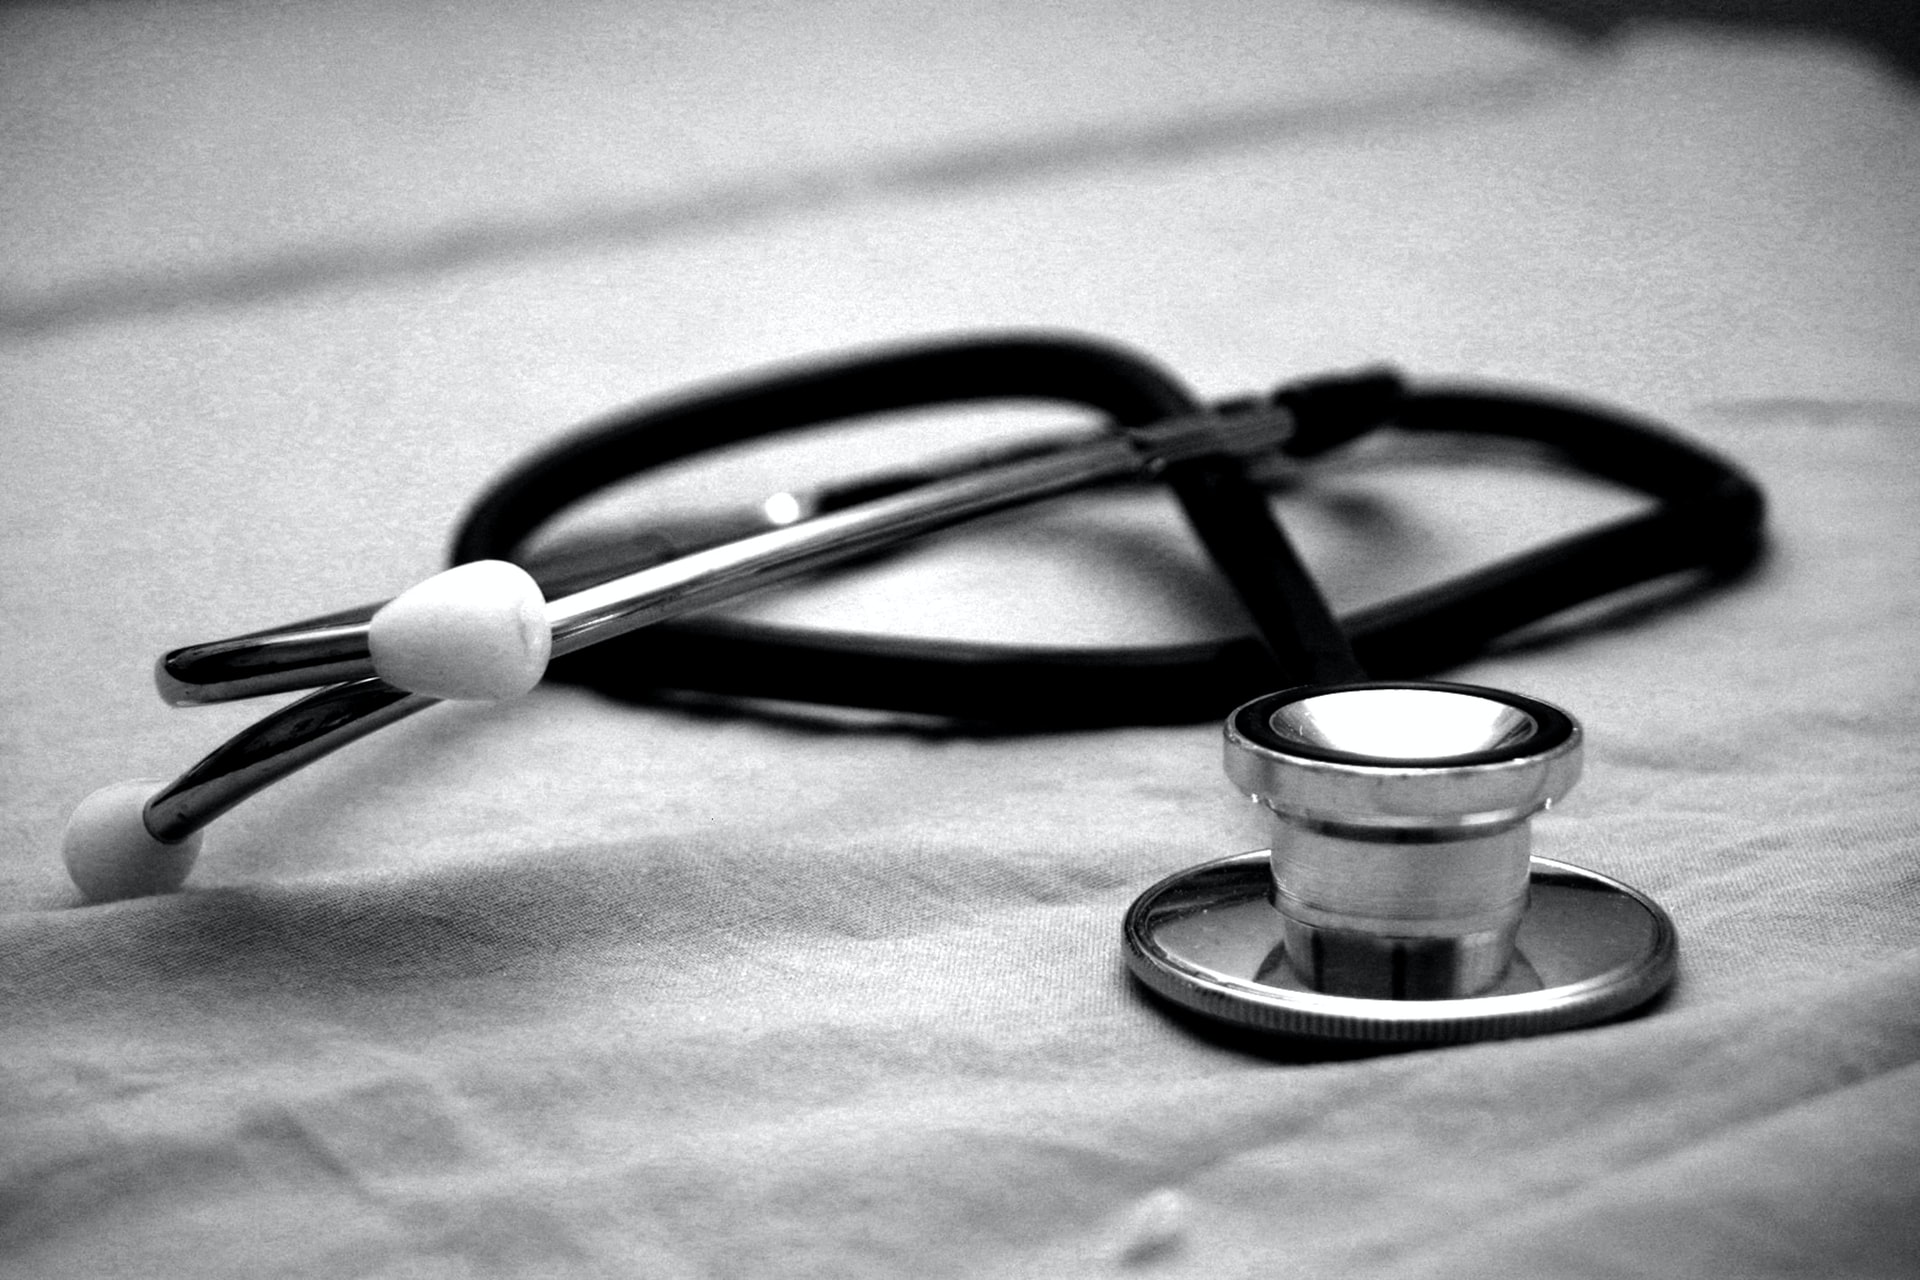 A stethoscope sits on a sheet, in black and white.